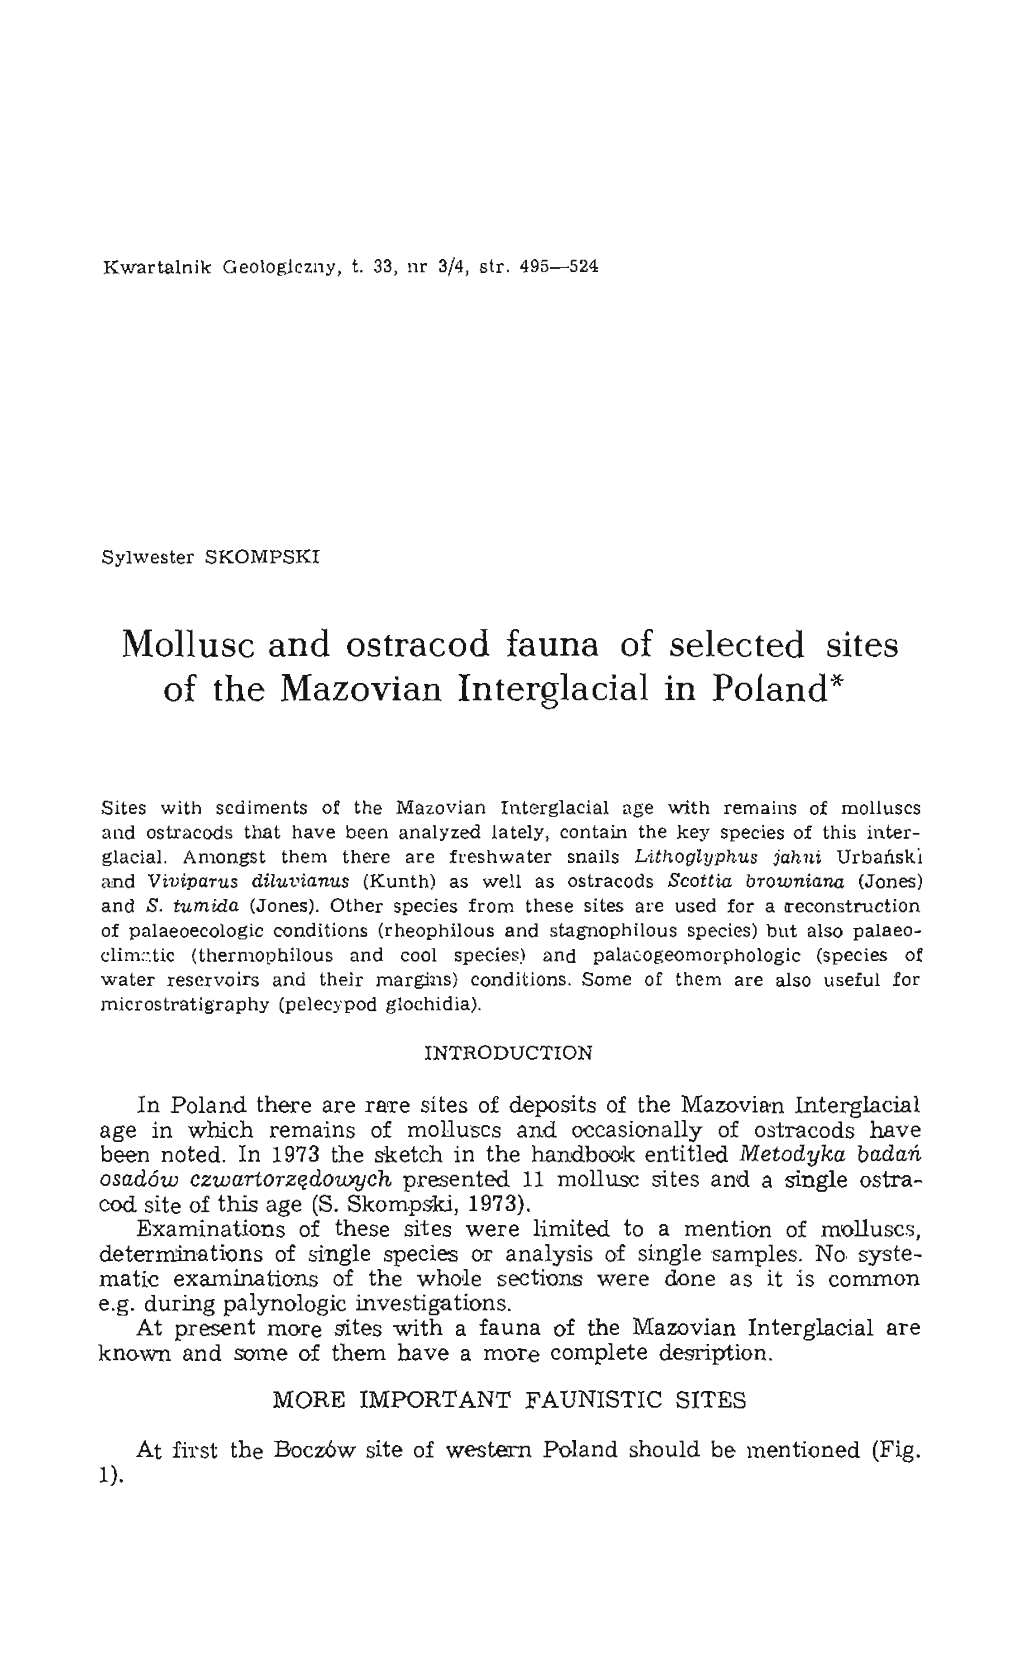 Mollusc and Ostracod Fauna of Selected Sites of the Mazovian Interglacial in Poland*